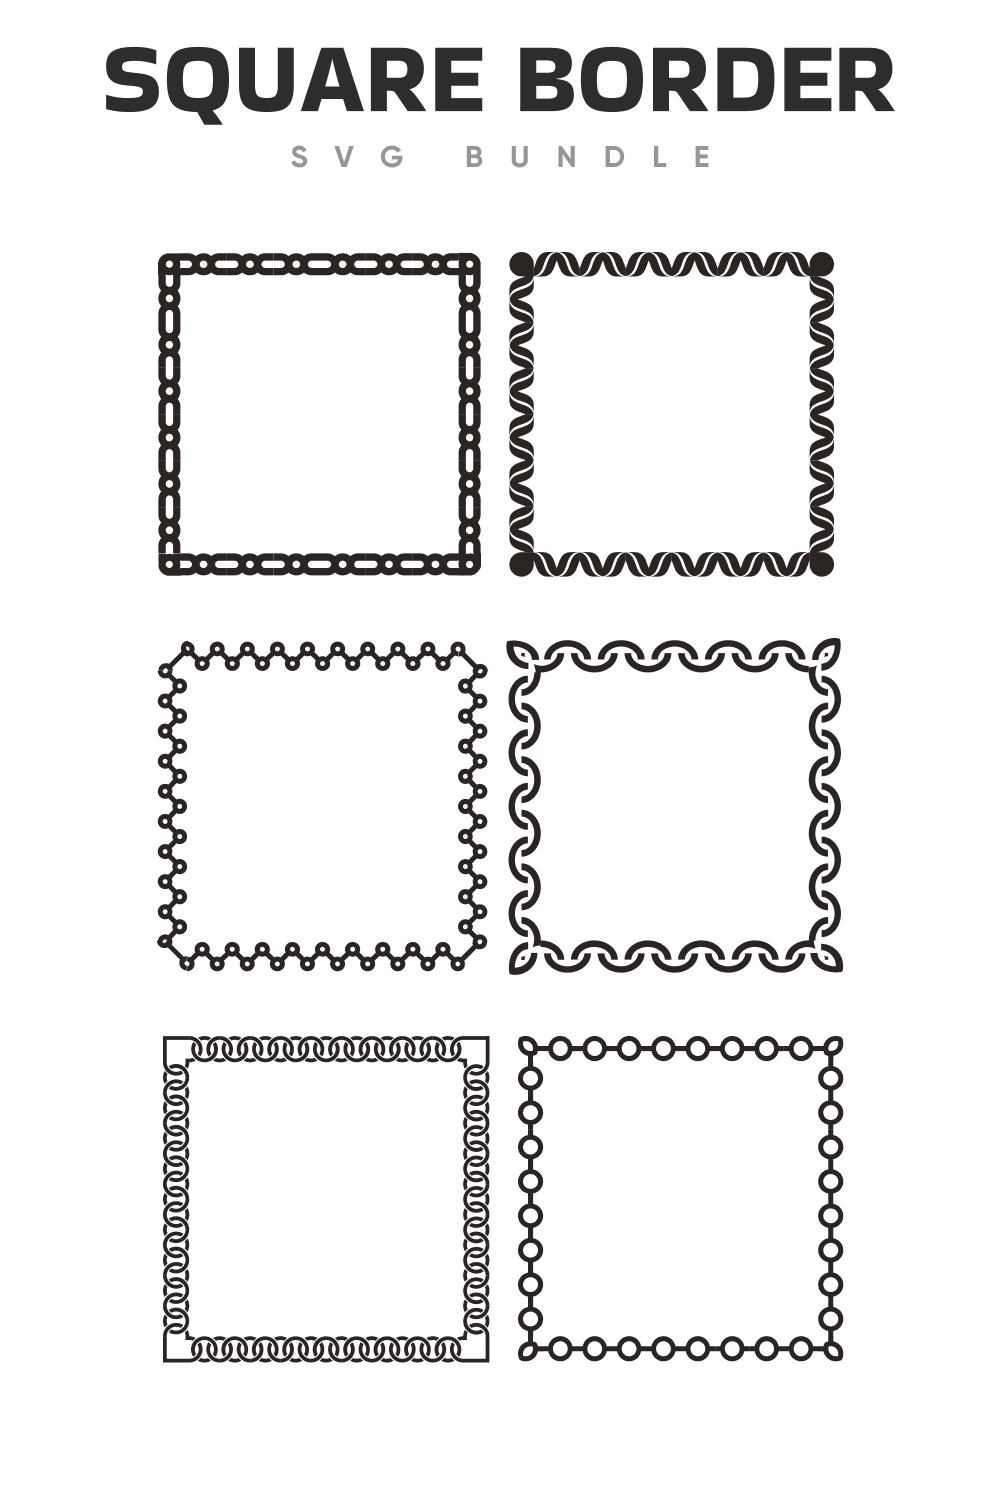 Black squares with different borders.